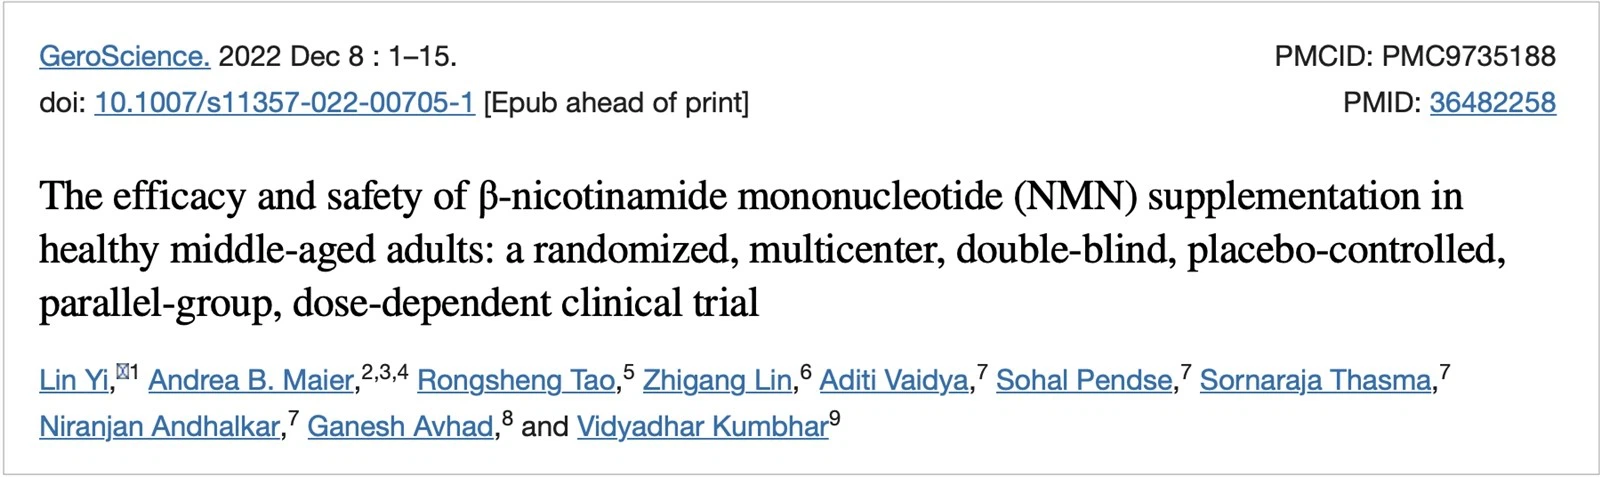 The efficacy and safety of -nicotinamide mononucleotide (NMN) supplementation inhealthy middle-aged adults: a randomized, multicenter, double-blind, placebo-controlled.parallel-group,dose-dependent clinical trial